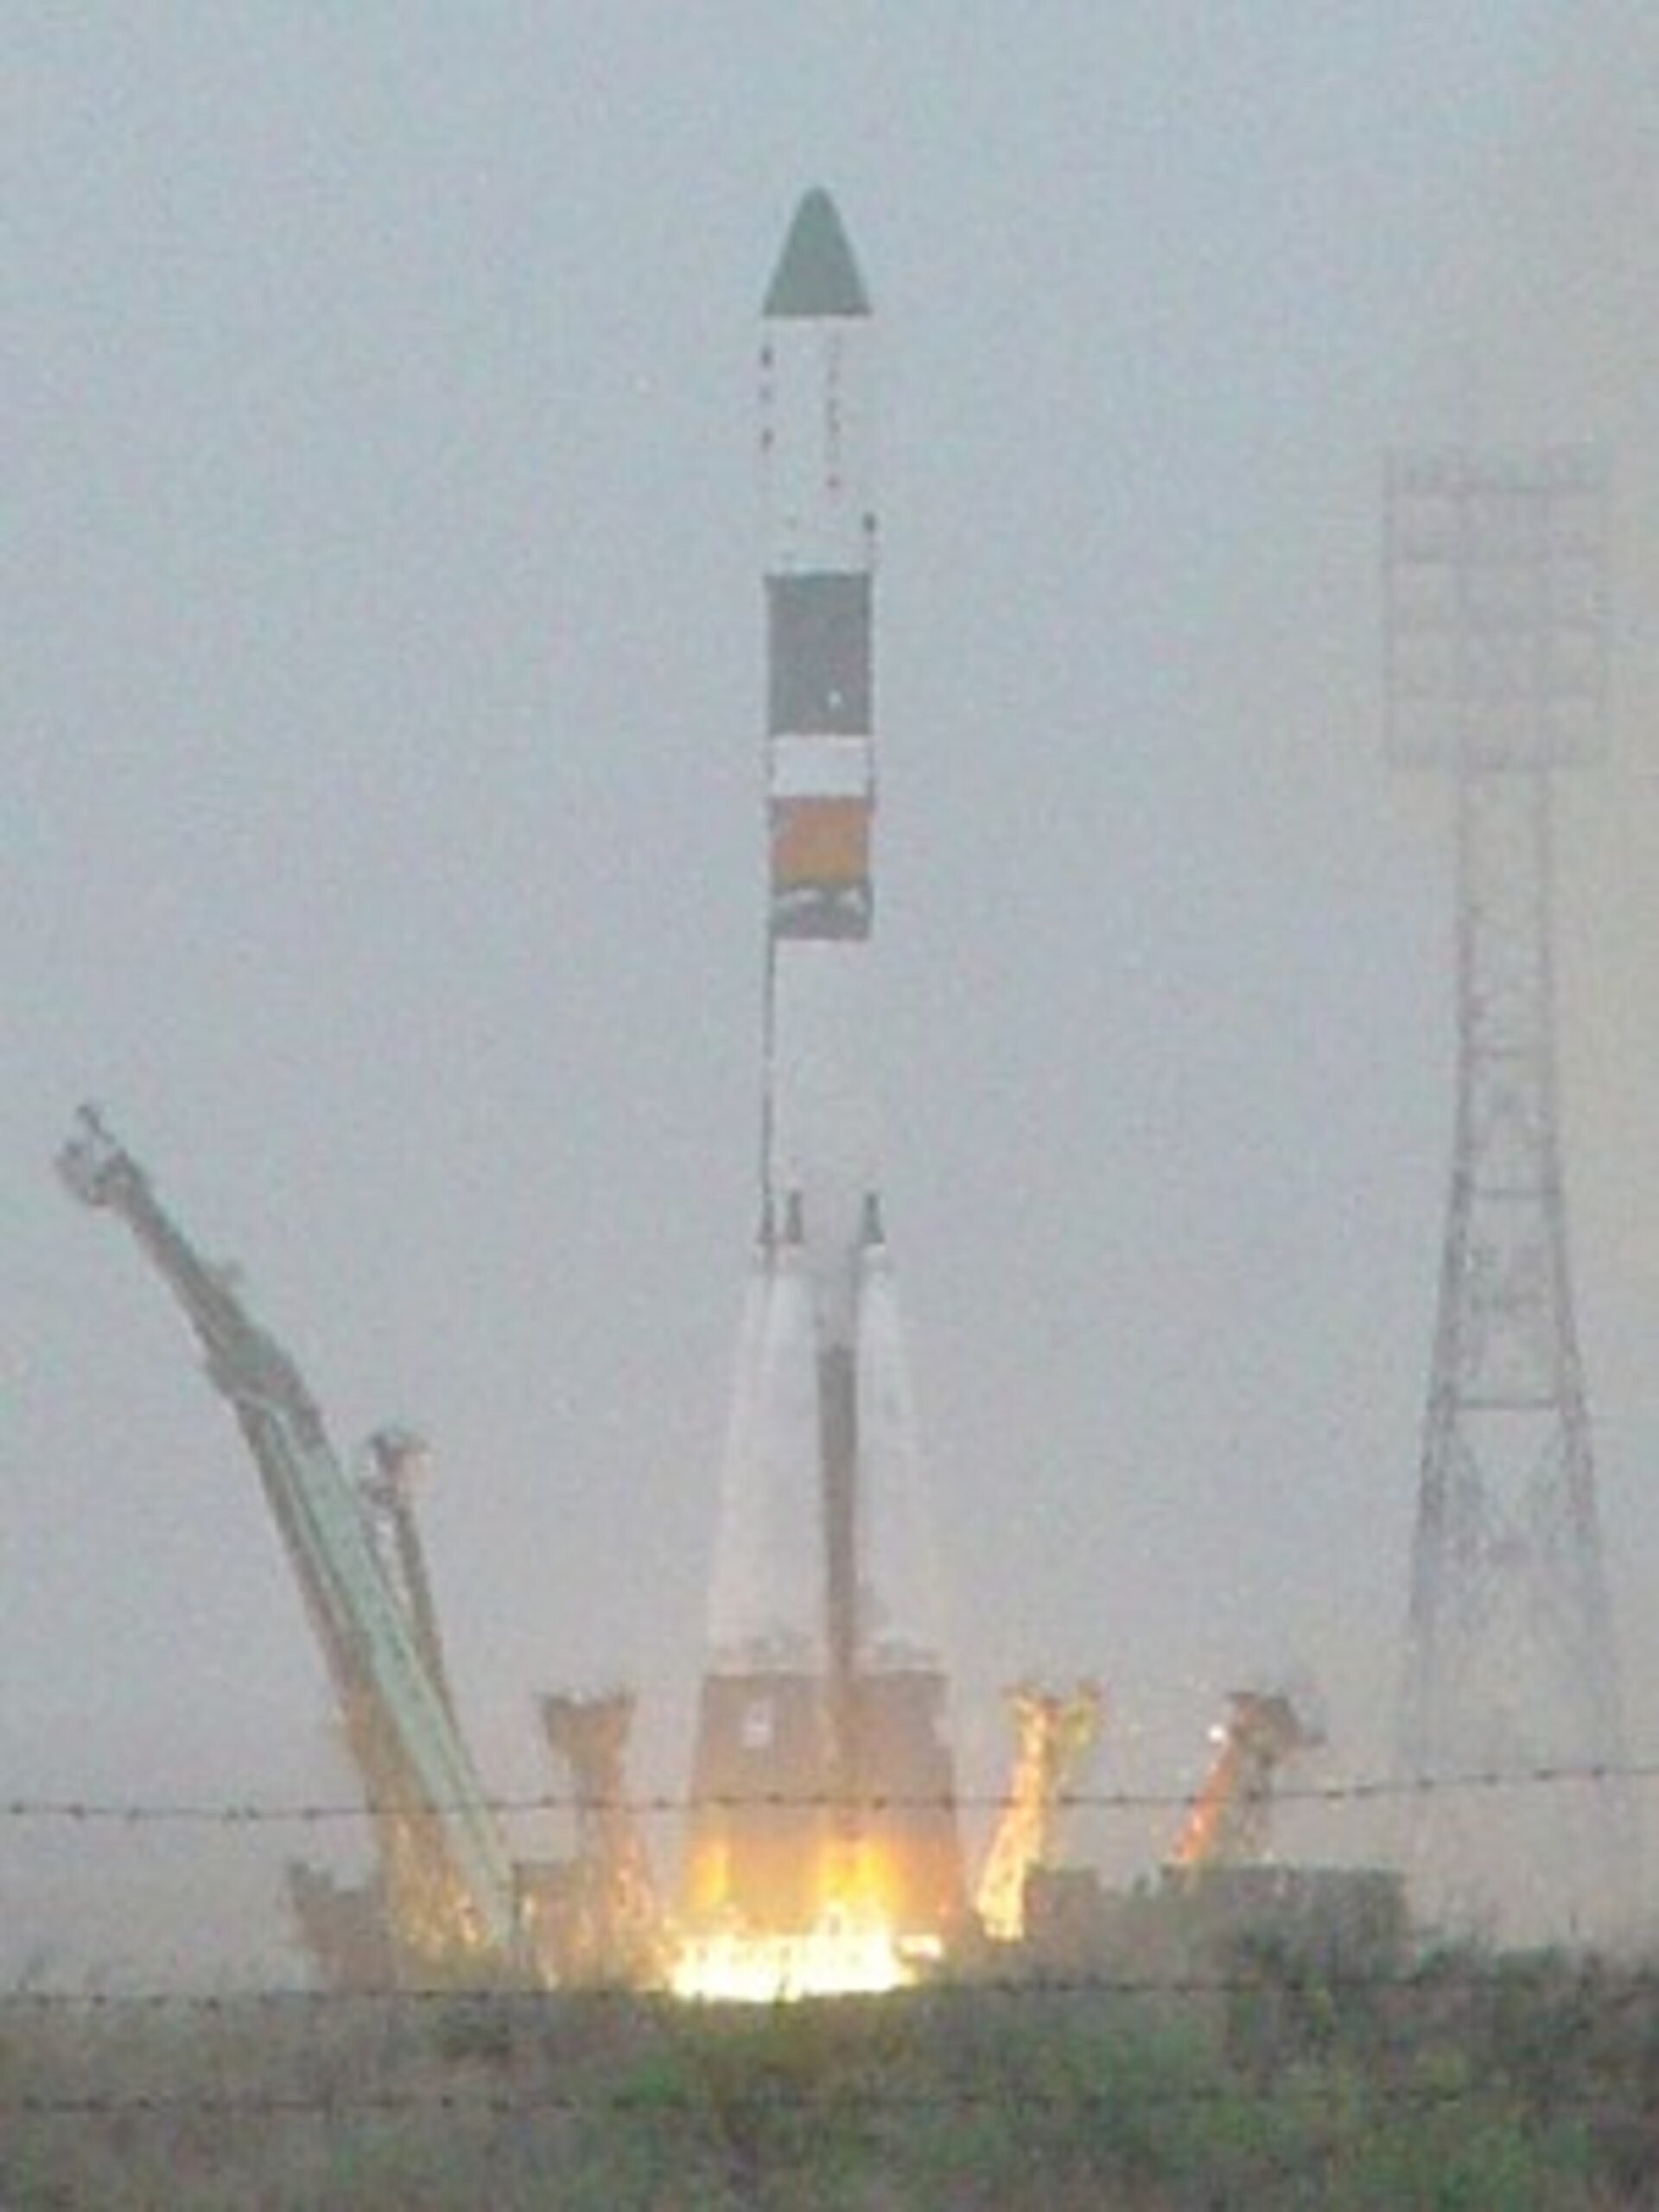 The Progress supply vehicle was launched from Baikonur Cosmodrome in Kazakhstan on 8 June 2003